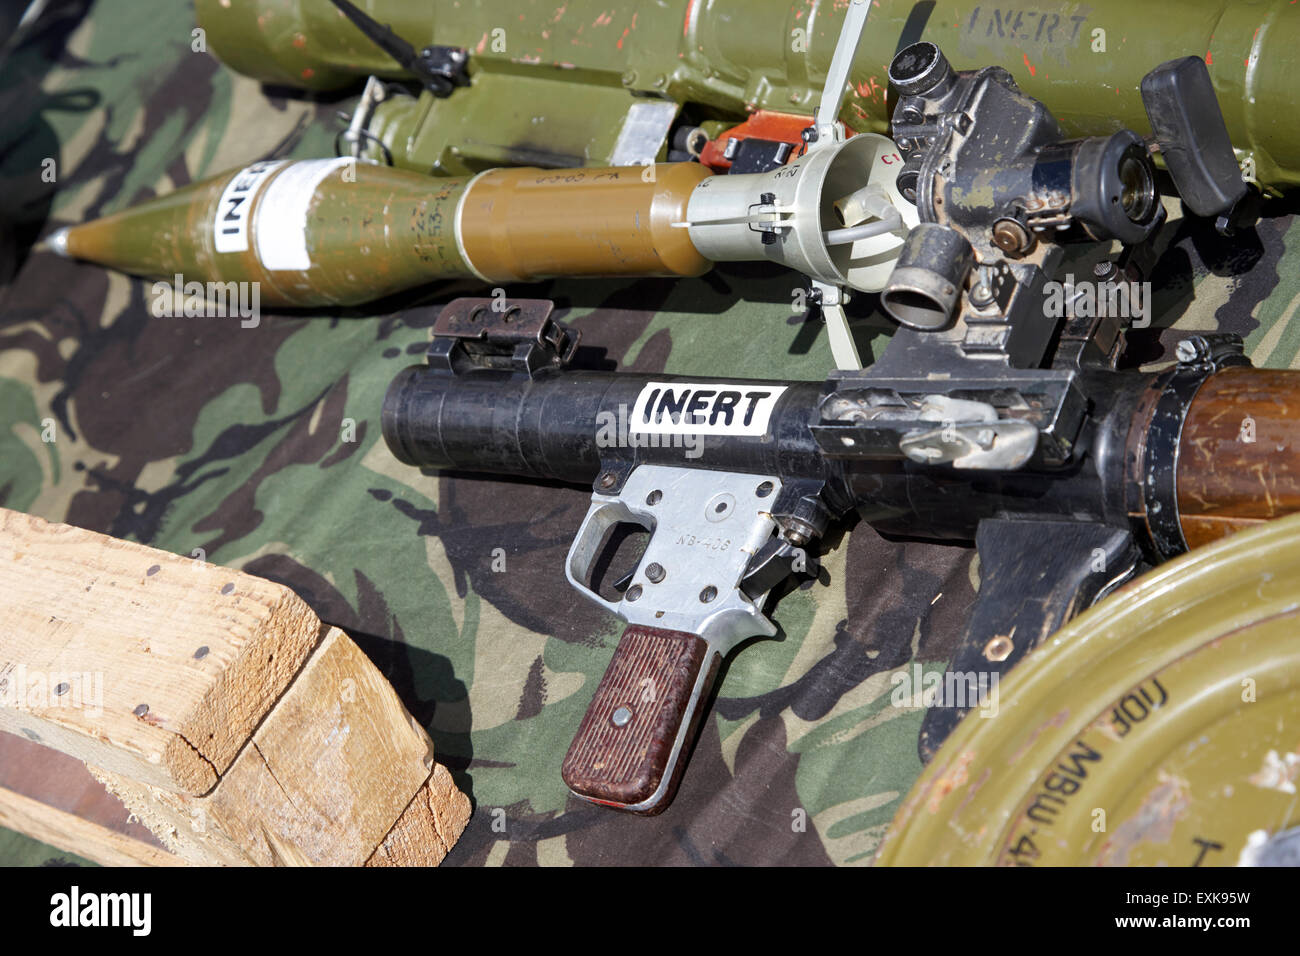 inert rpg rocket propelled grenade used for military training purposes recovered from afghanistan Stock Photo